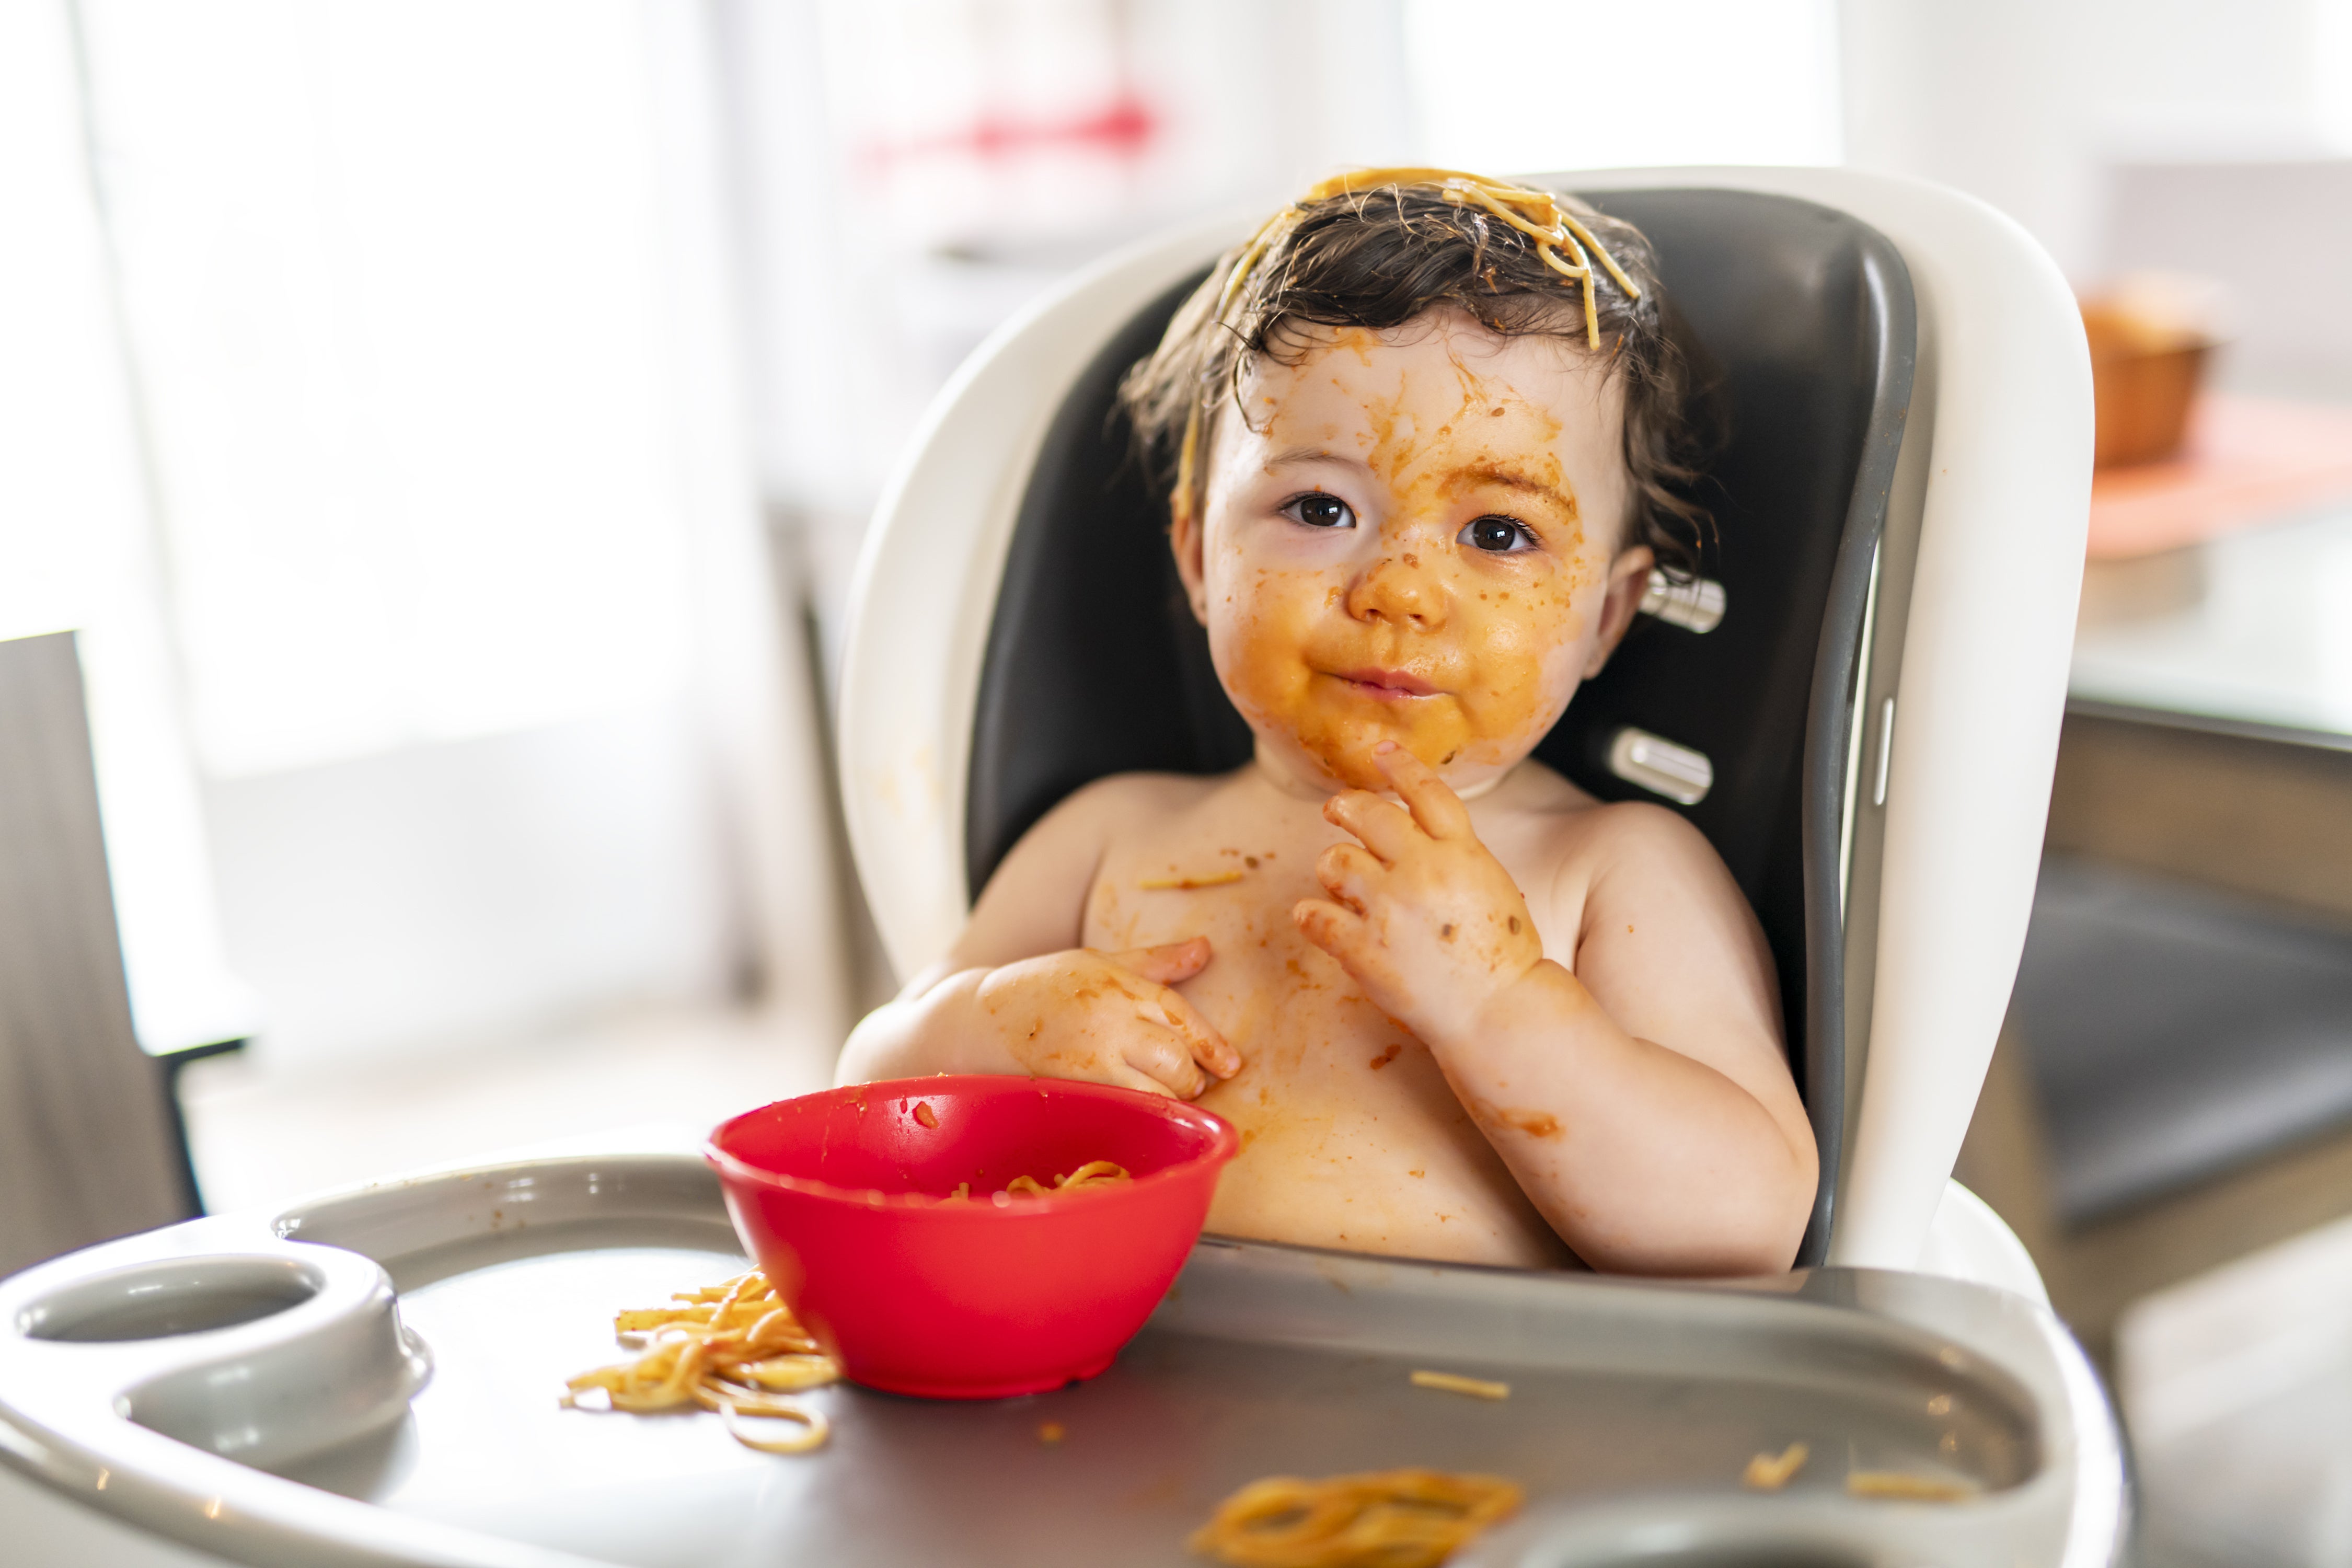 Tips for managing fussy eating in toddlers